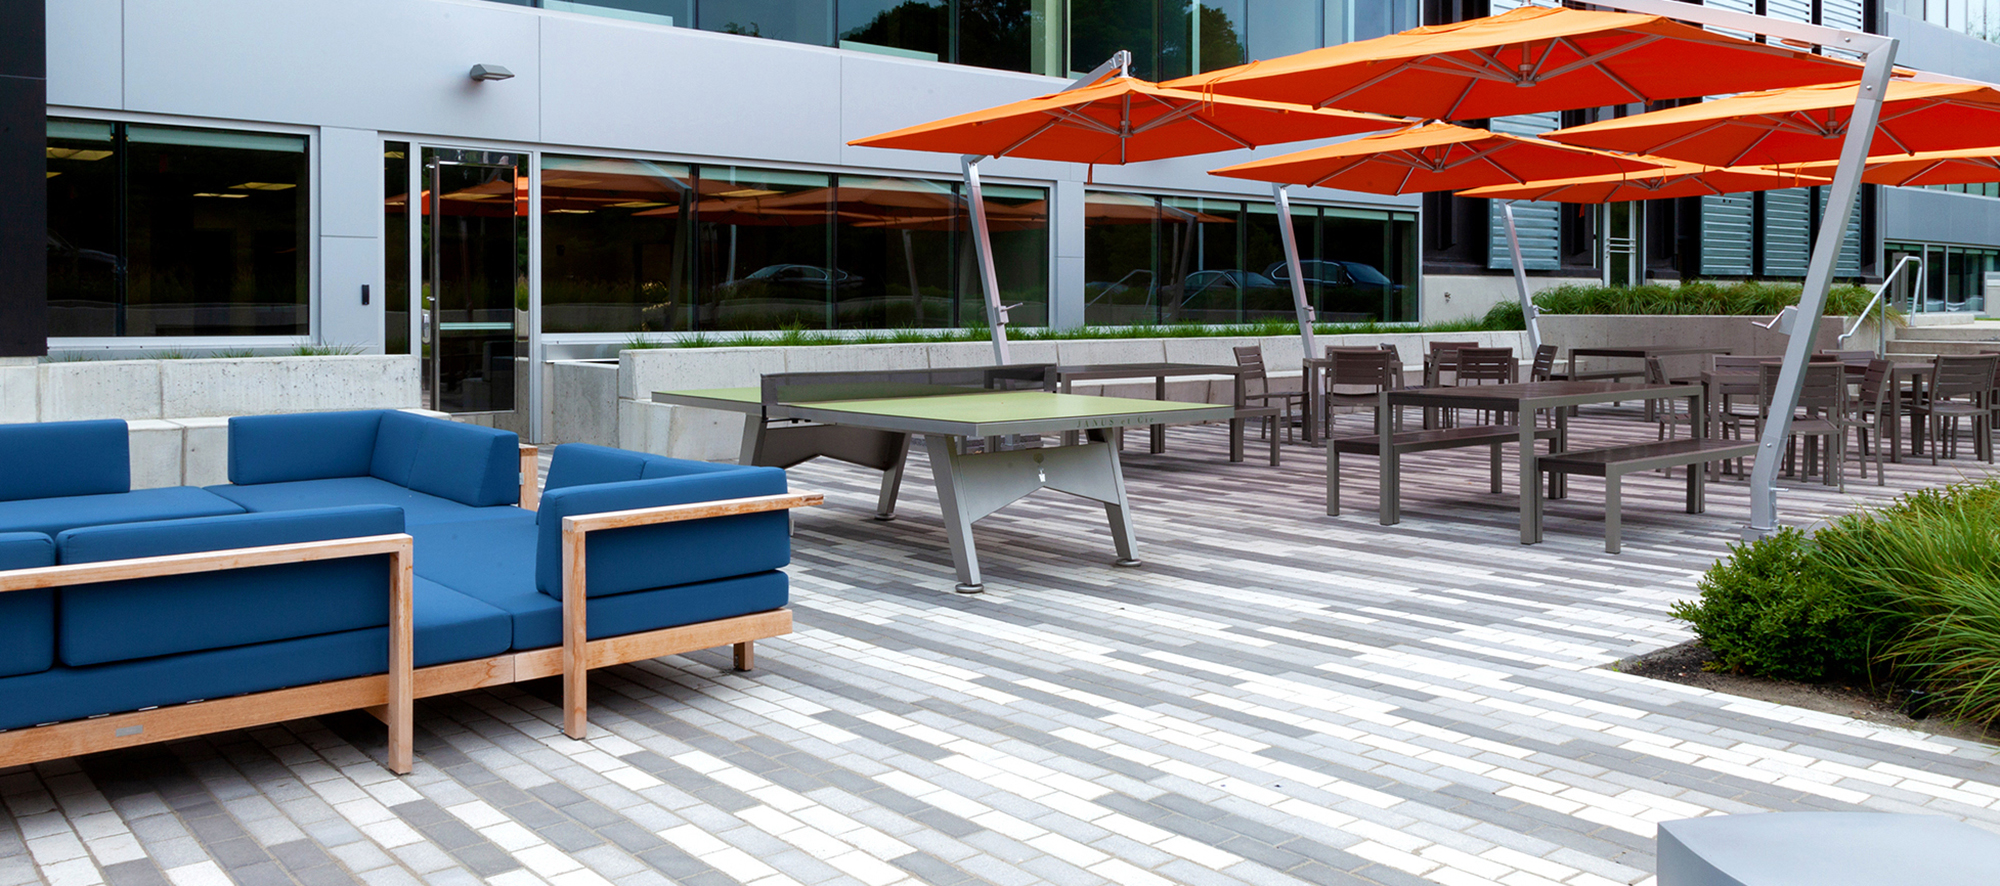 180 Wells Ave. outdoor amenity area features a 3 color linear pattern made from Unilock Umbriano pavers, and large orange umbrellas.